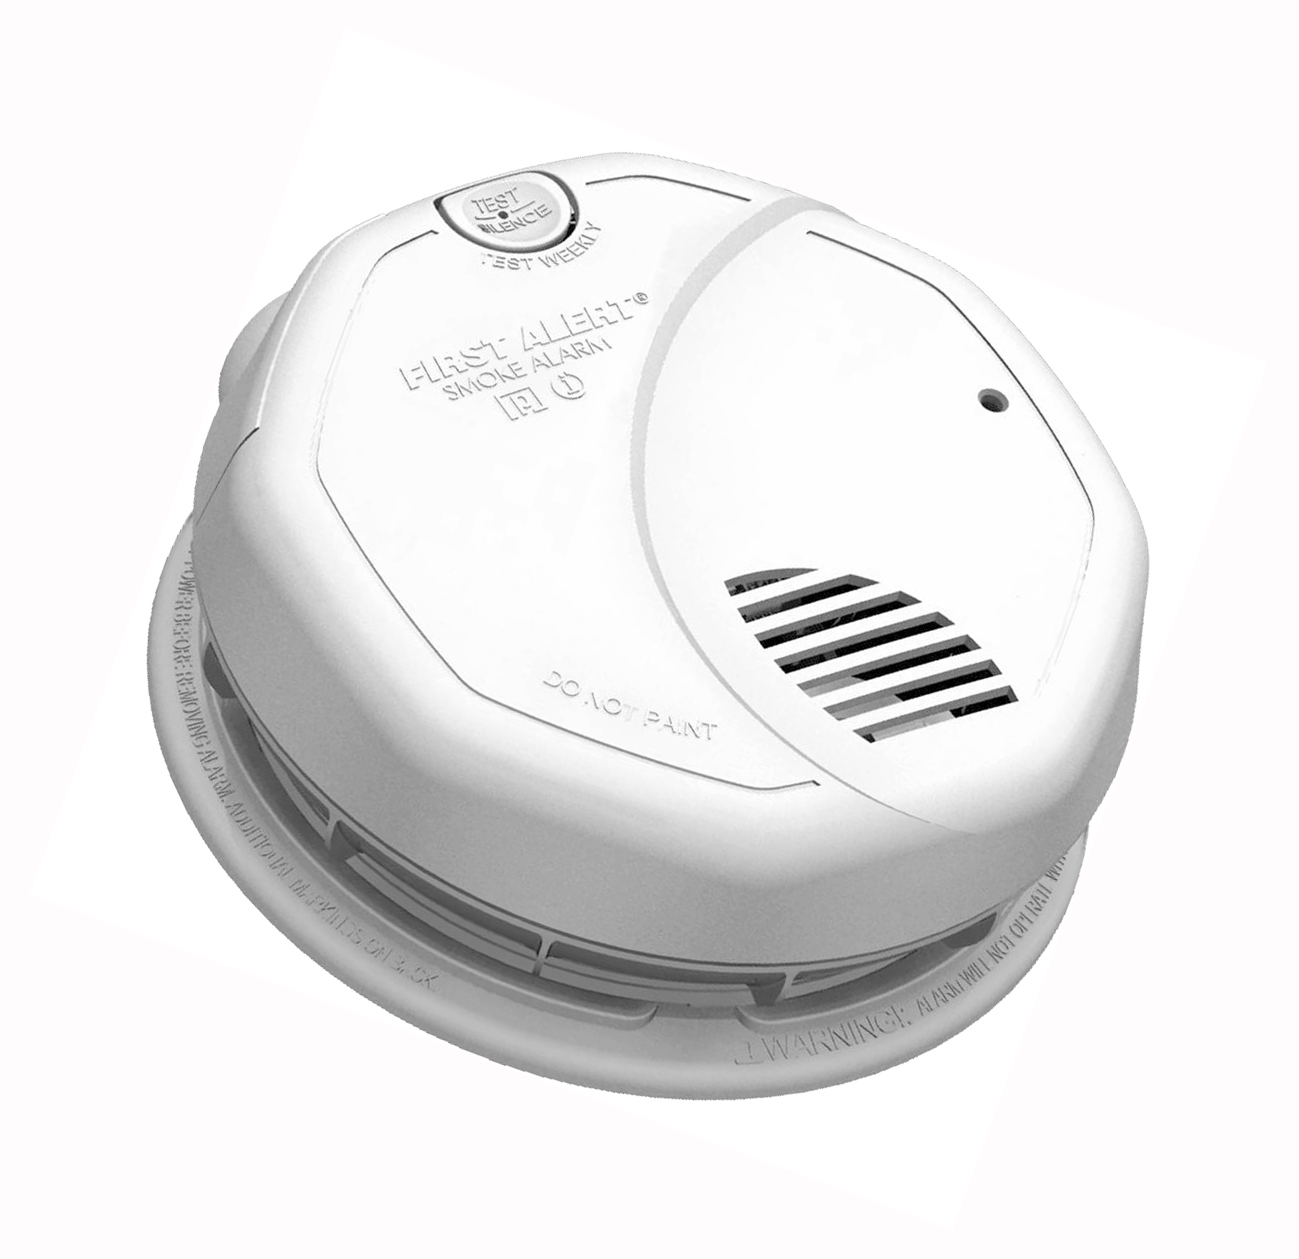 Hardwired Photo/Ion smoke alarm provides double protection for both flaming and smoldering fires.